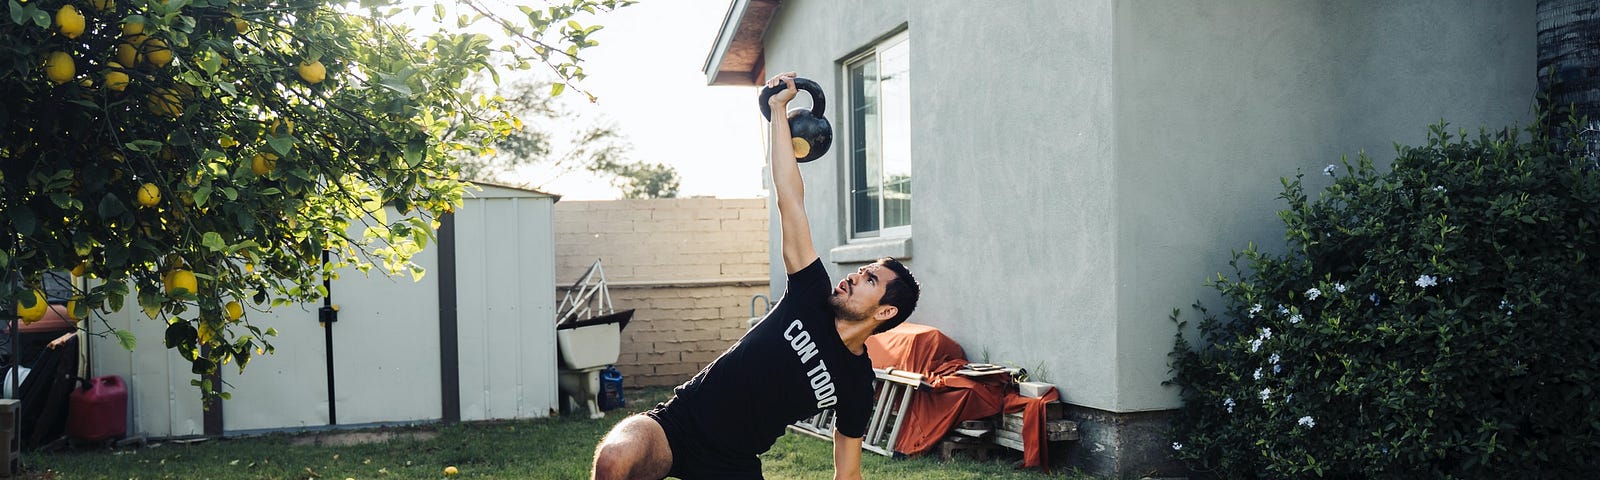 Man working out with kettlebells at home.